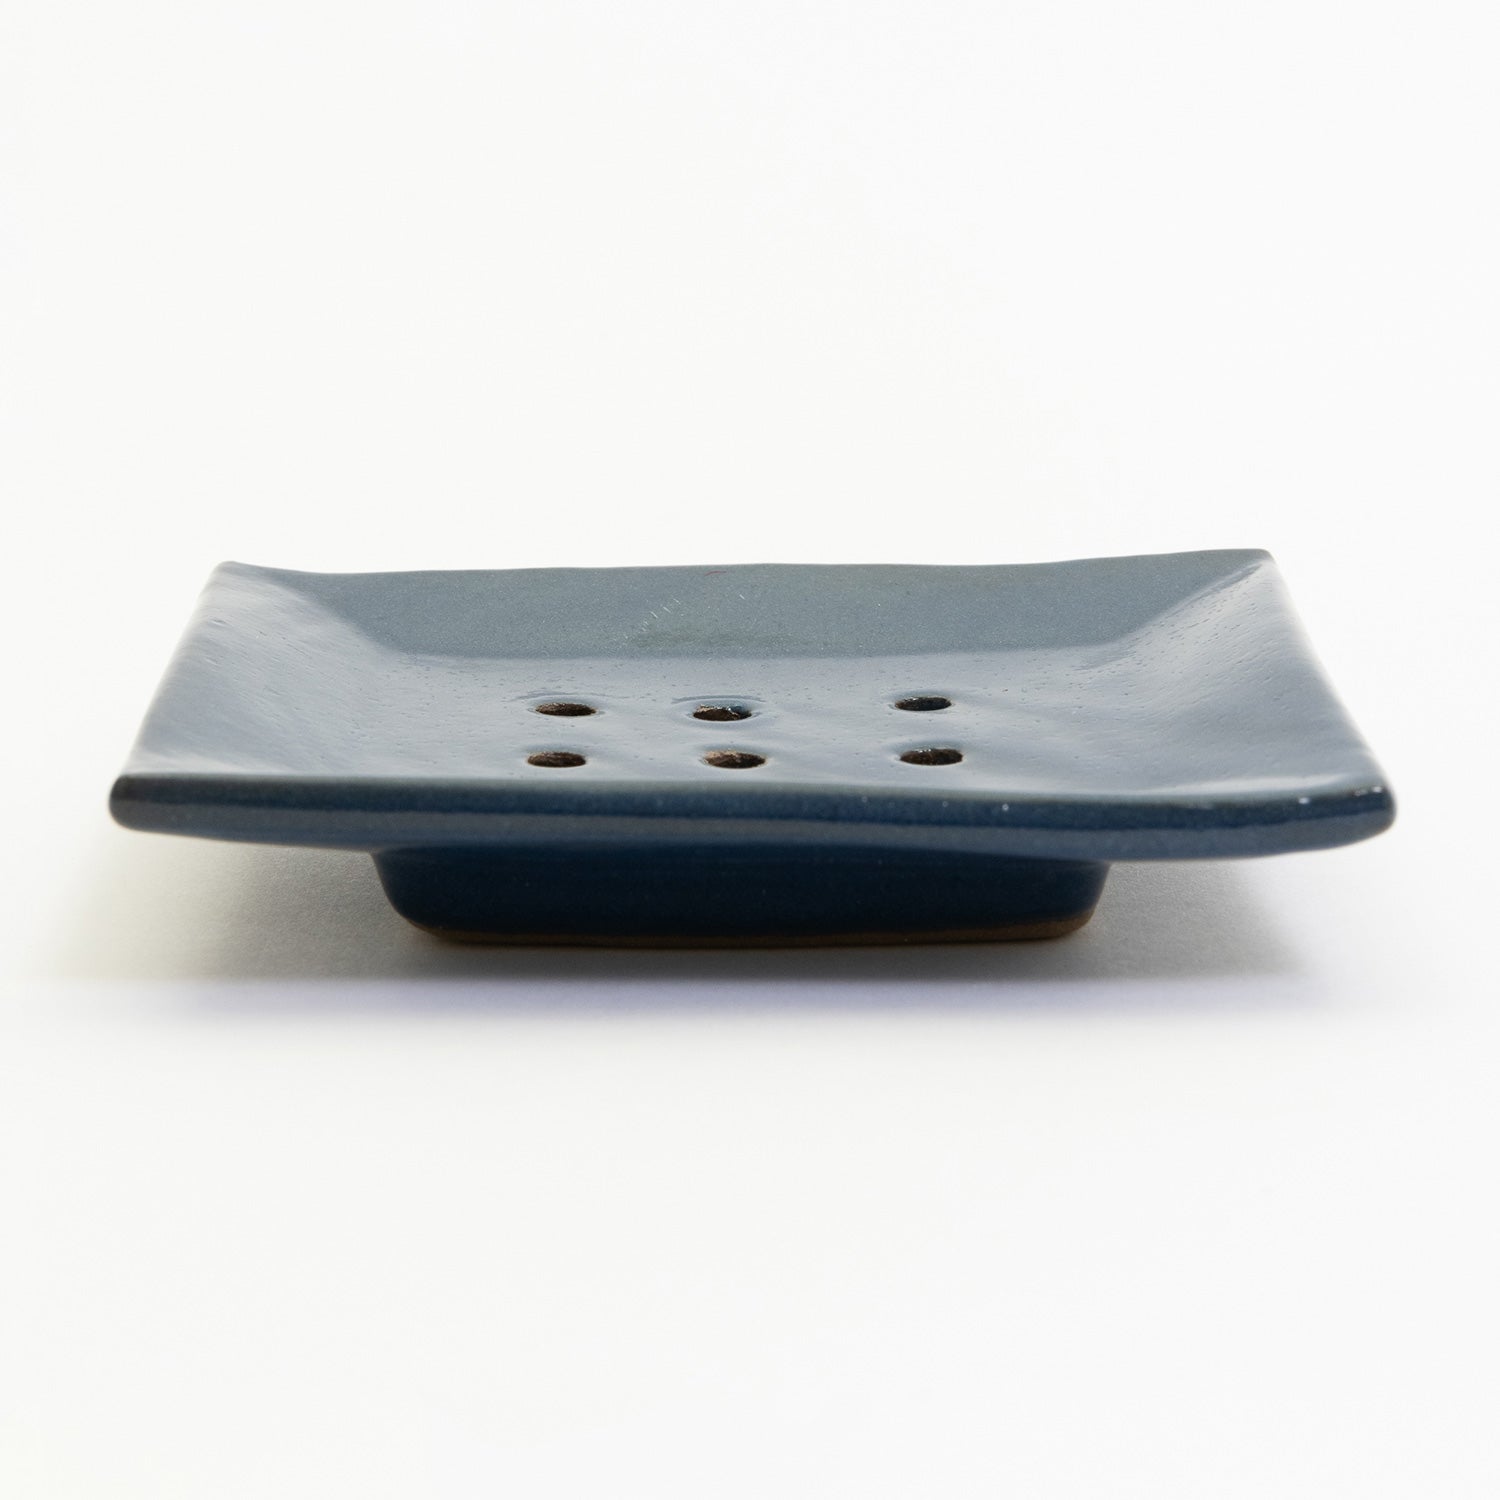 A cobalt blue stoneware soap dish pictured on a white background.